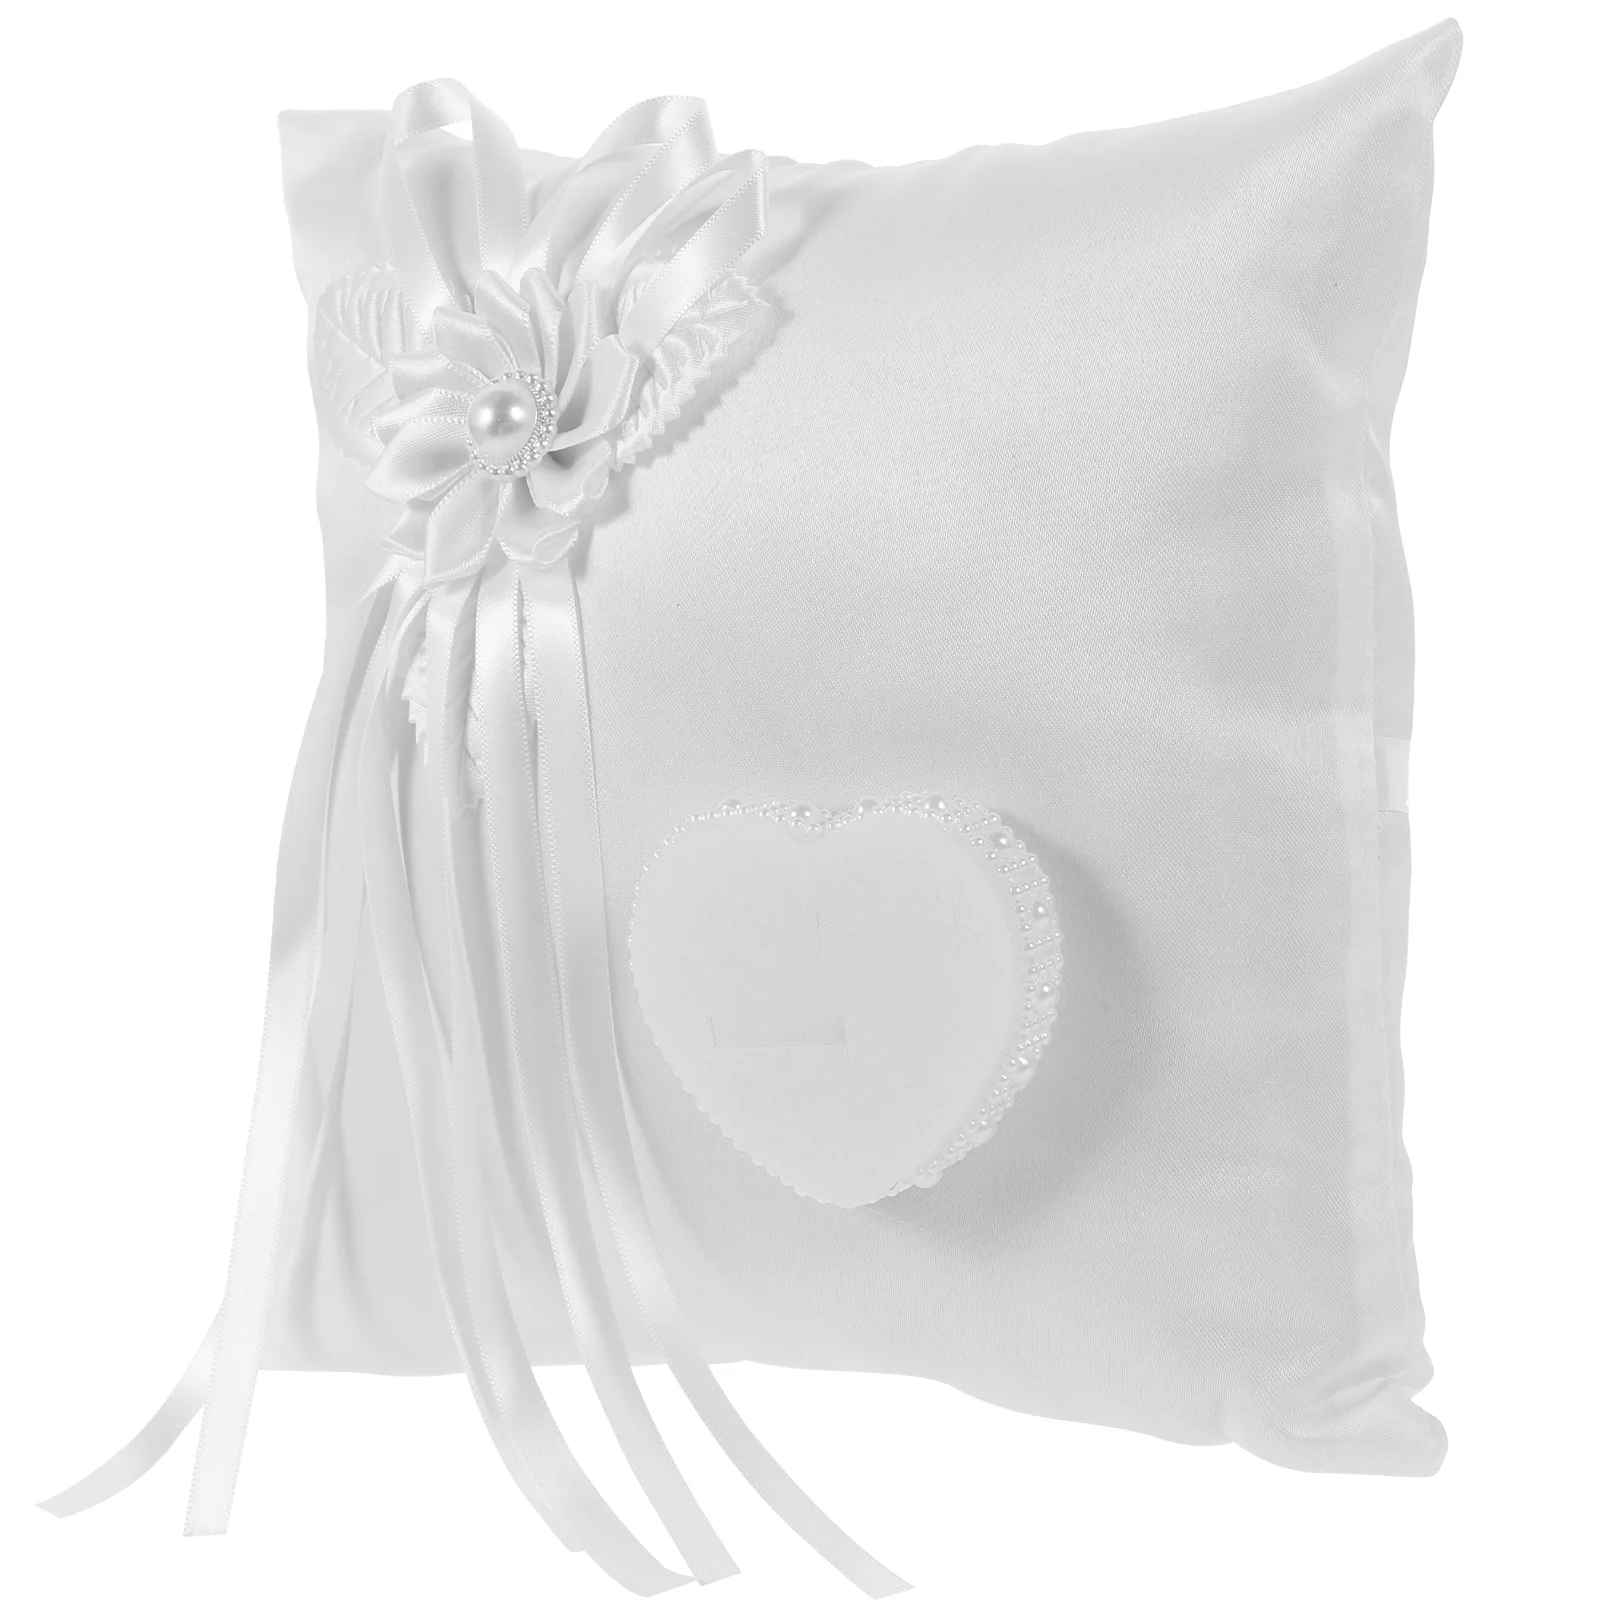 

Ring Pillow Wedding Bearer Cushion Holder Pillows Bridal Lace Box Flower Engagement Pearl Ceremony Jewelry Satin Square White